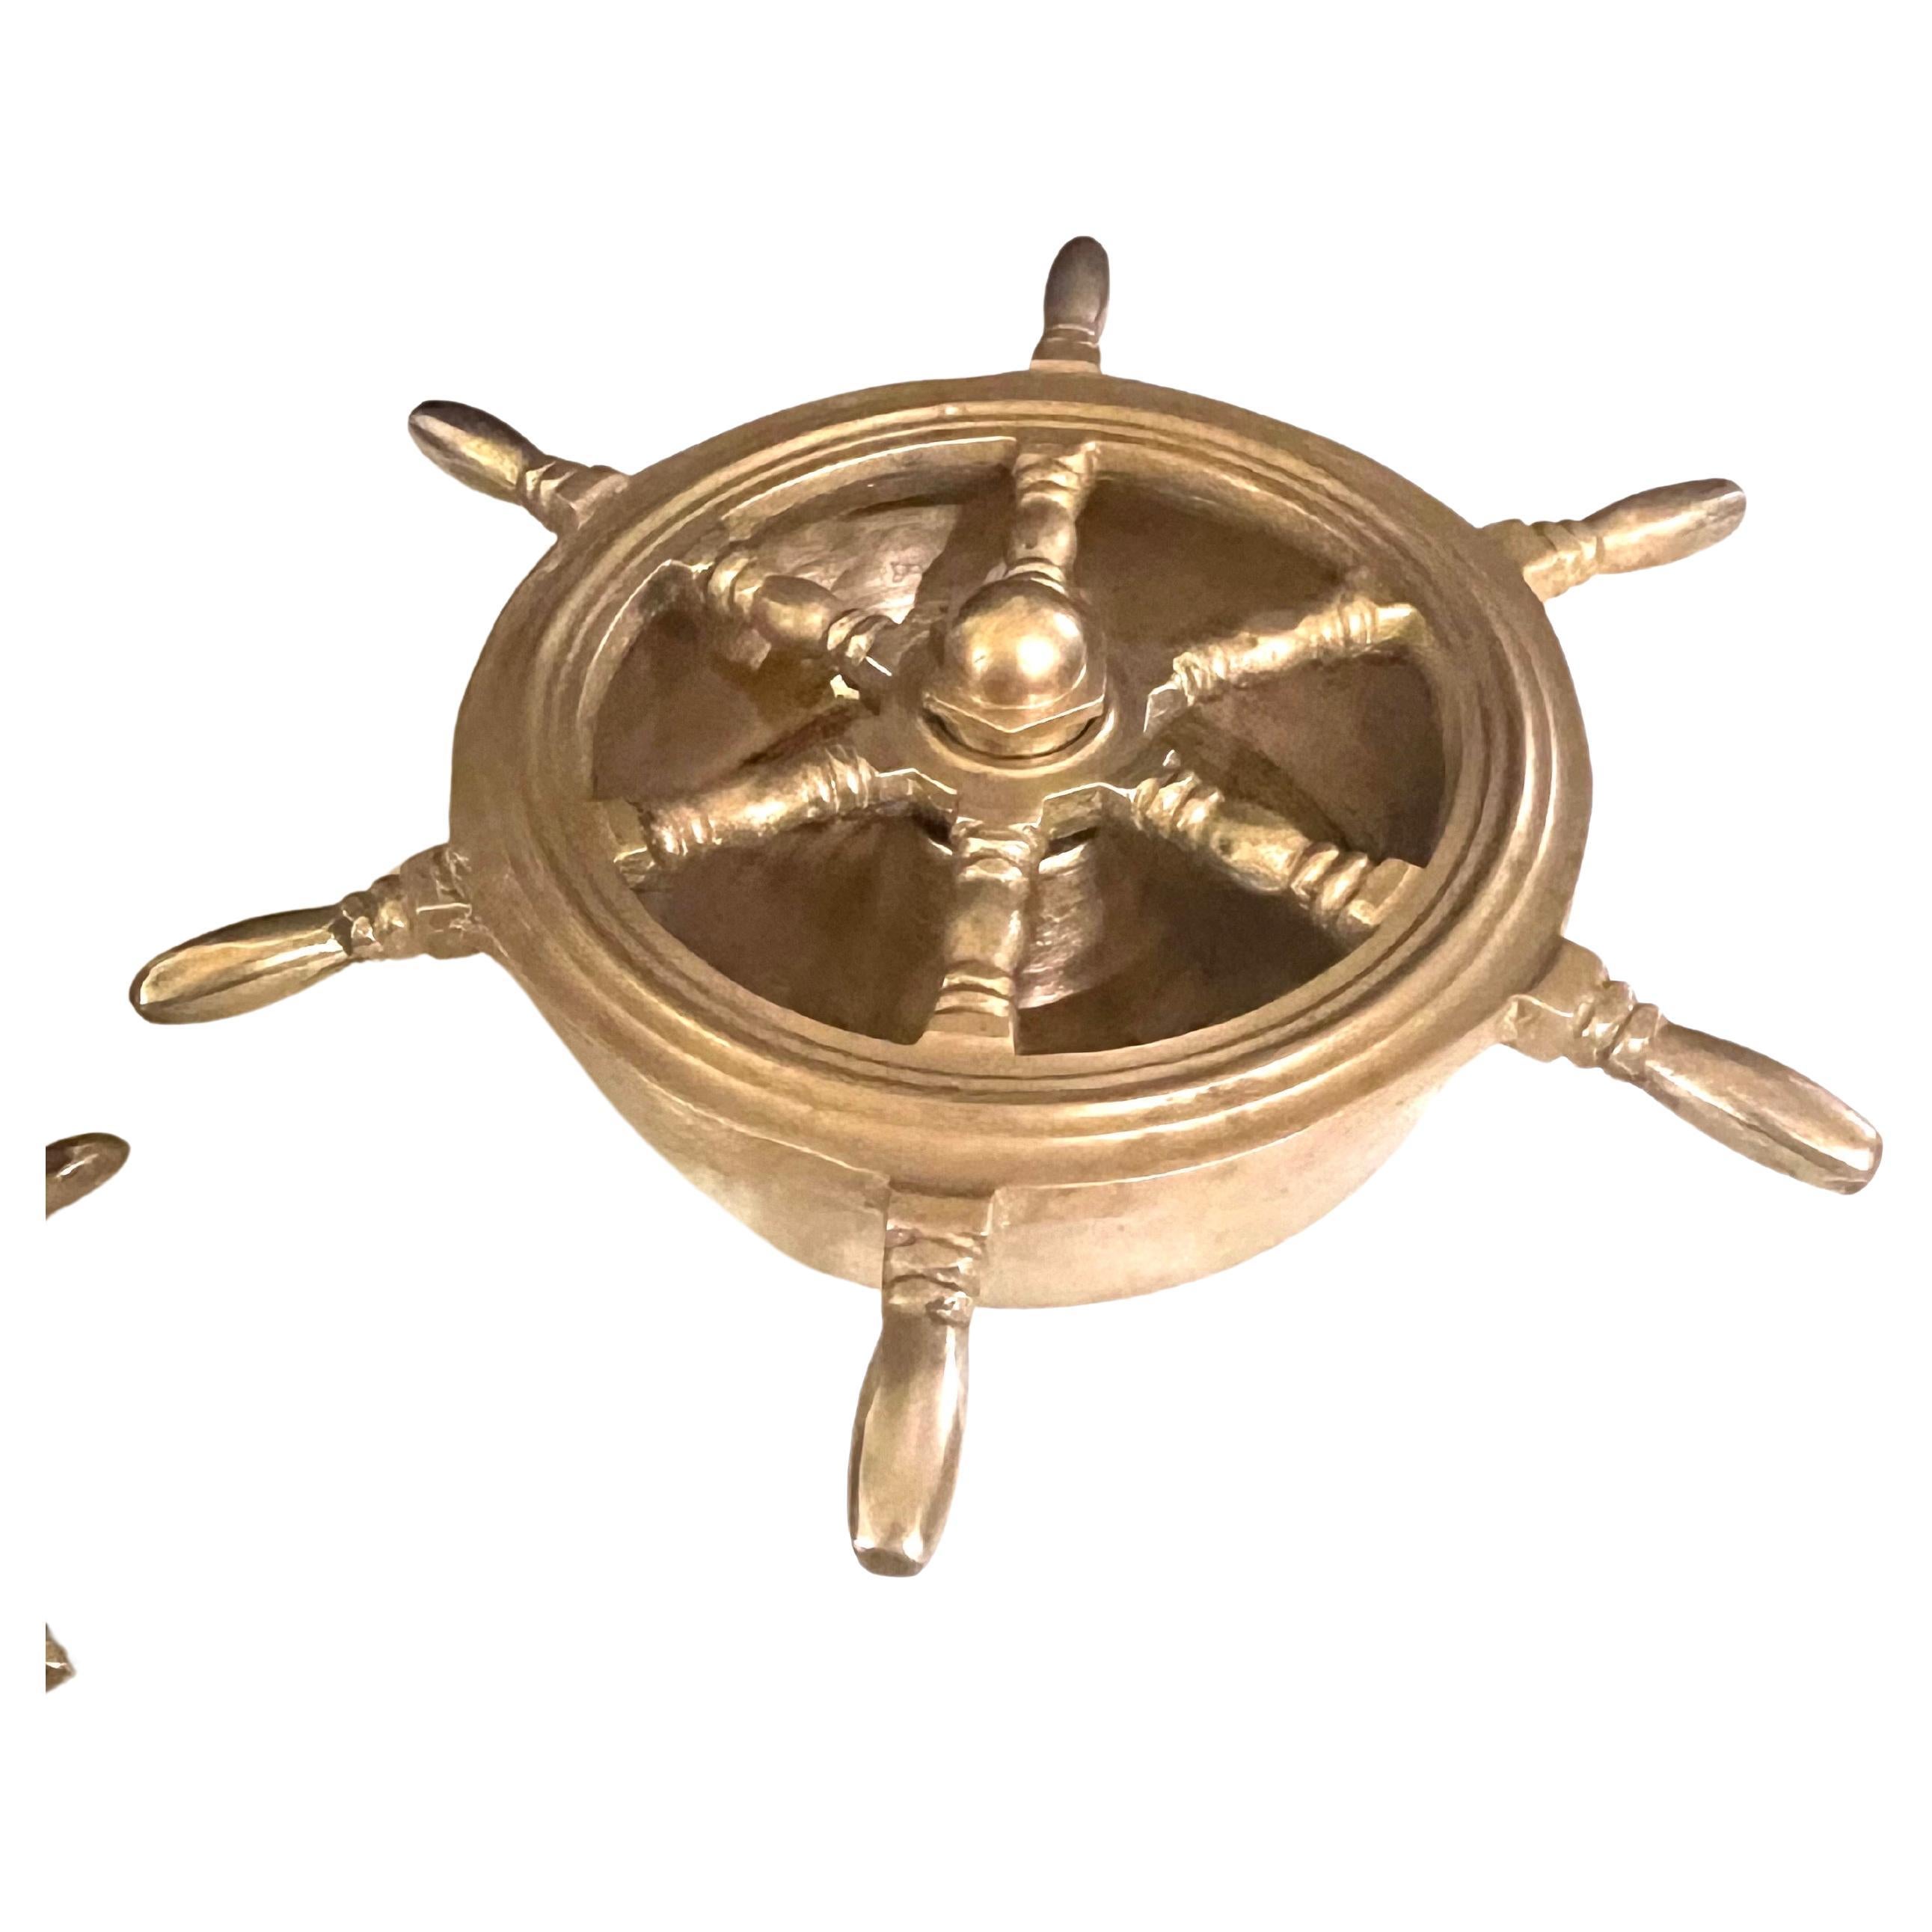 Hollywood Regency Whimsical Solid Brass Nautical Candle Holder & Ashtray Steering Wheel For Sale